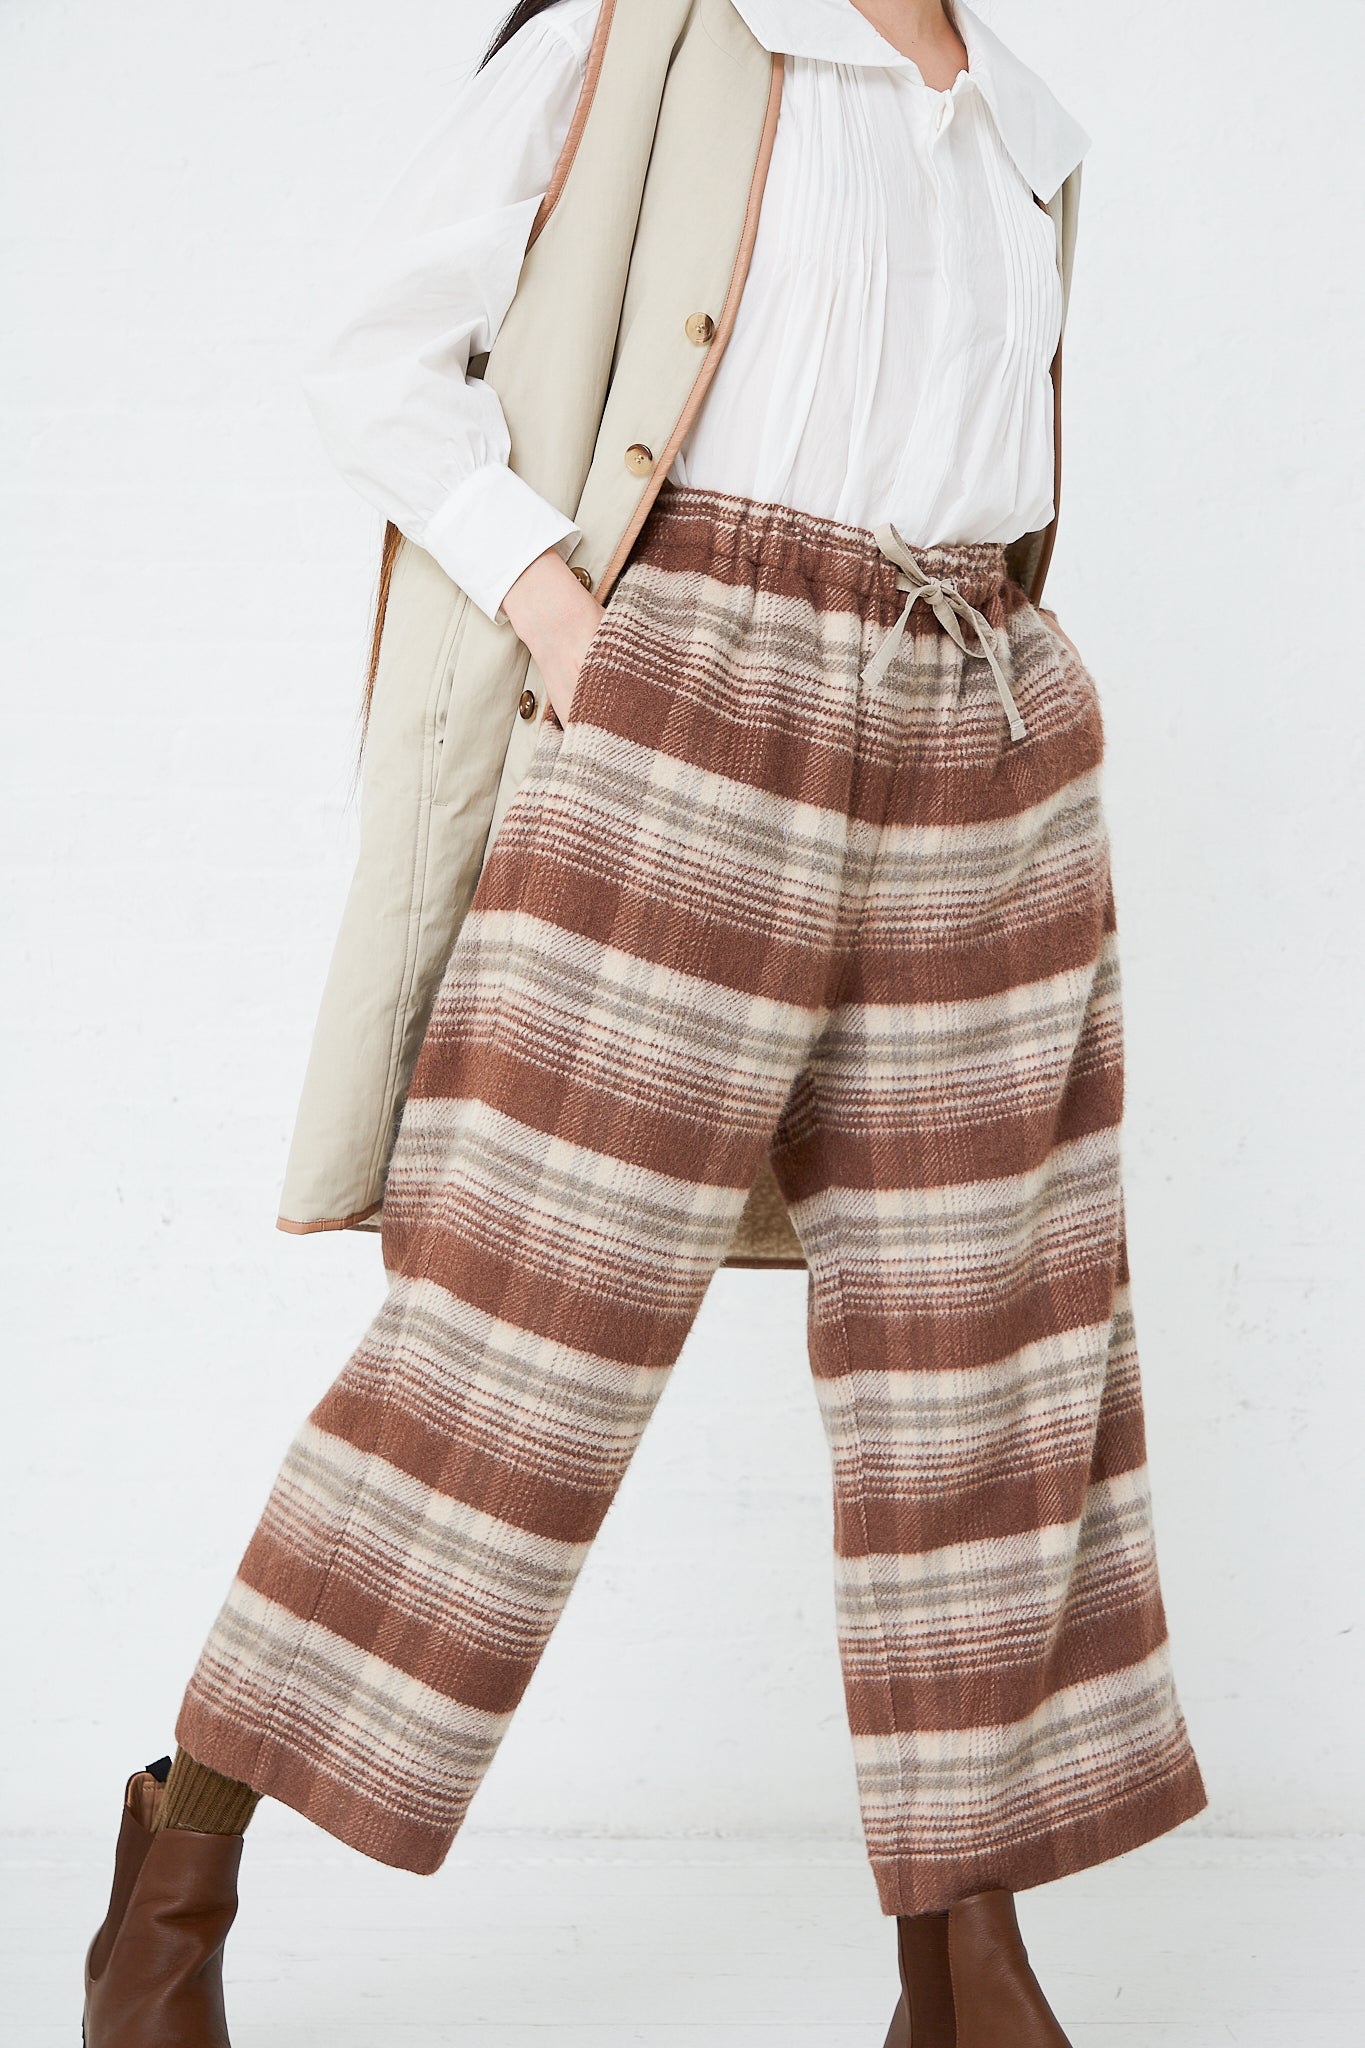 The model is wearing Silk Plaid Mosser Cloth Pajama Pants in Cocoa Brown by Toujours.